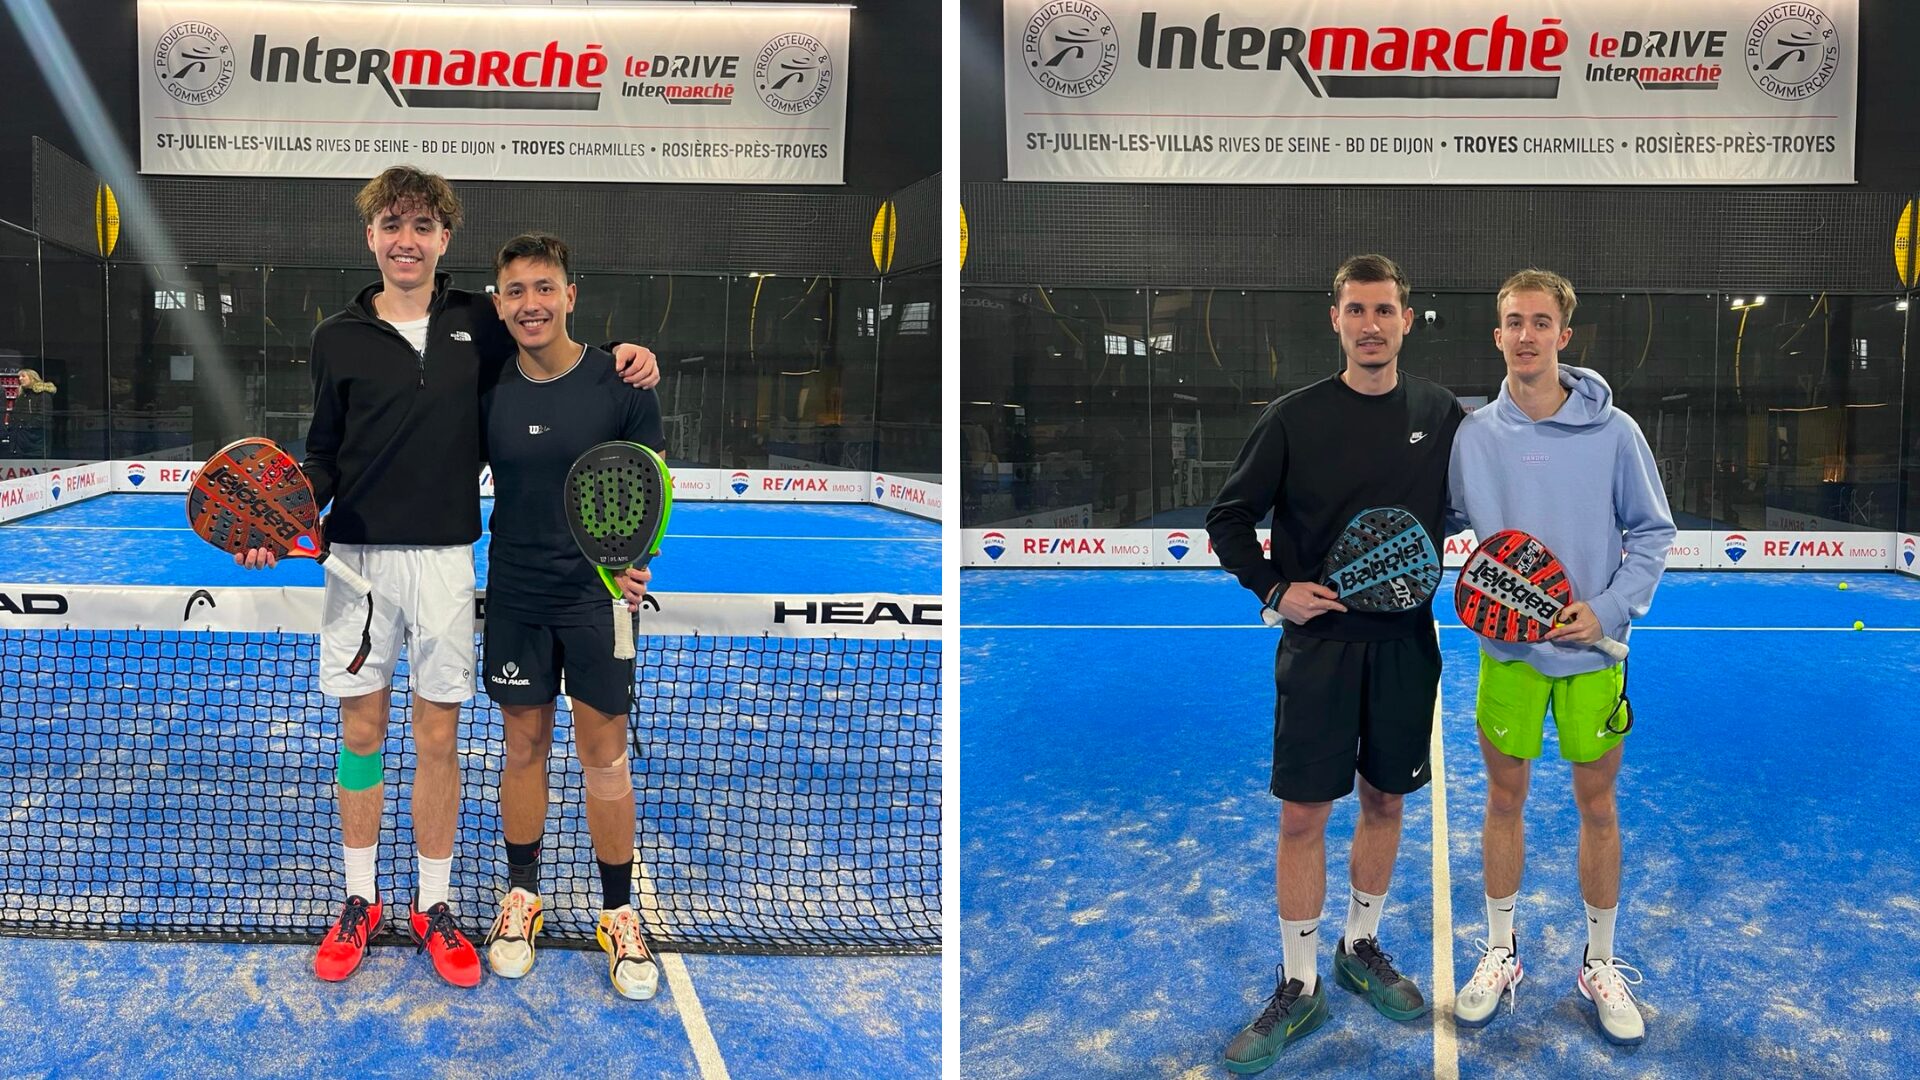 P1000 Open Padel 3 Troyes – Start of the quarter-finals, to follow, live!